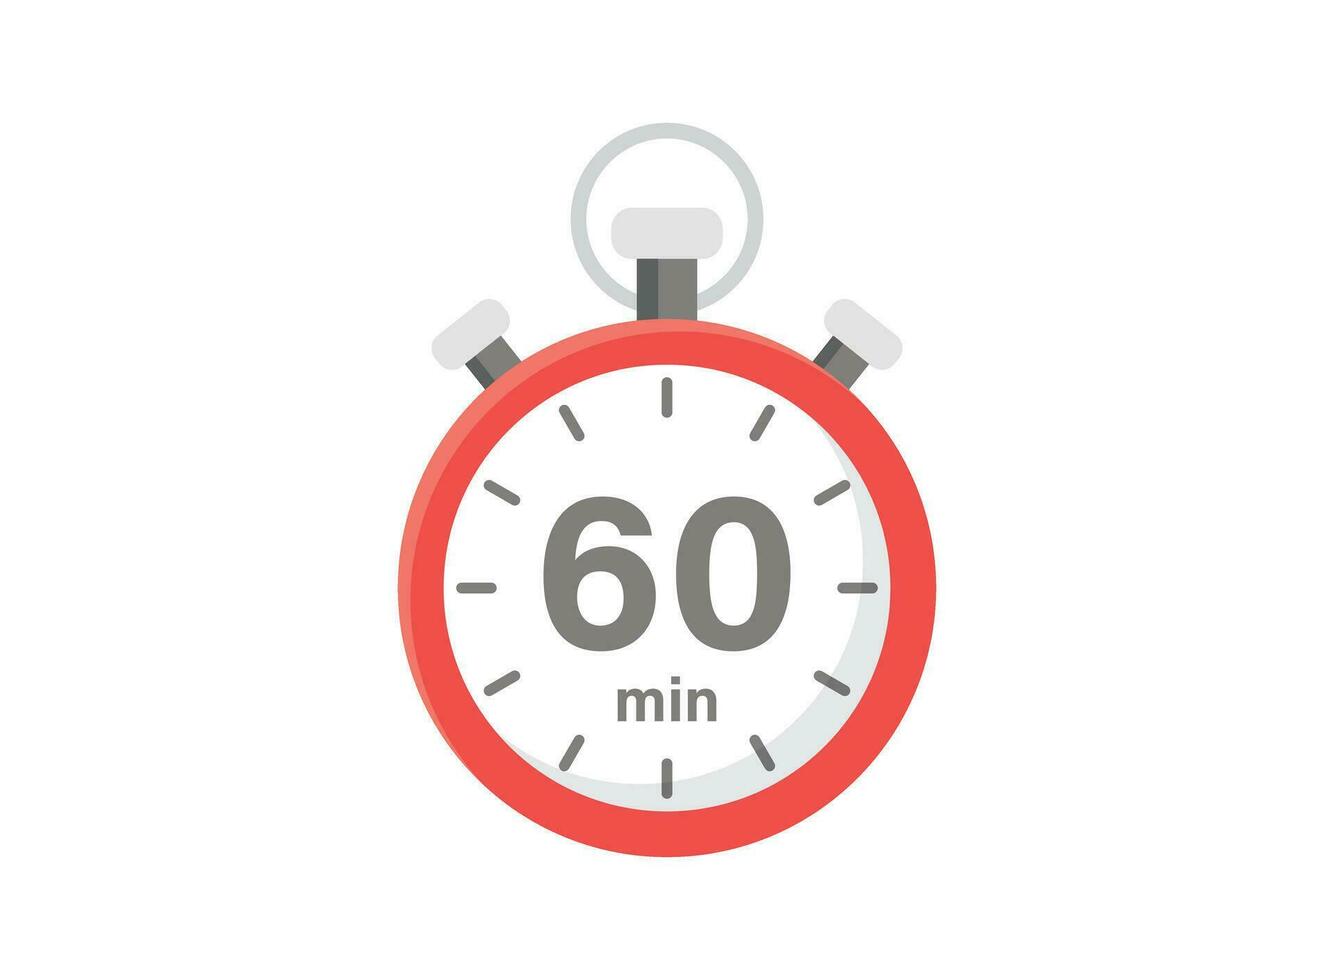 60 minutes on stopwatch icon in flat style. Clock face timer vector illustration on isolated background. Countdown sign business concept.